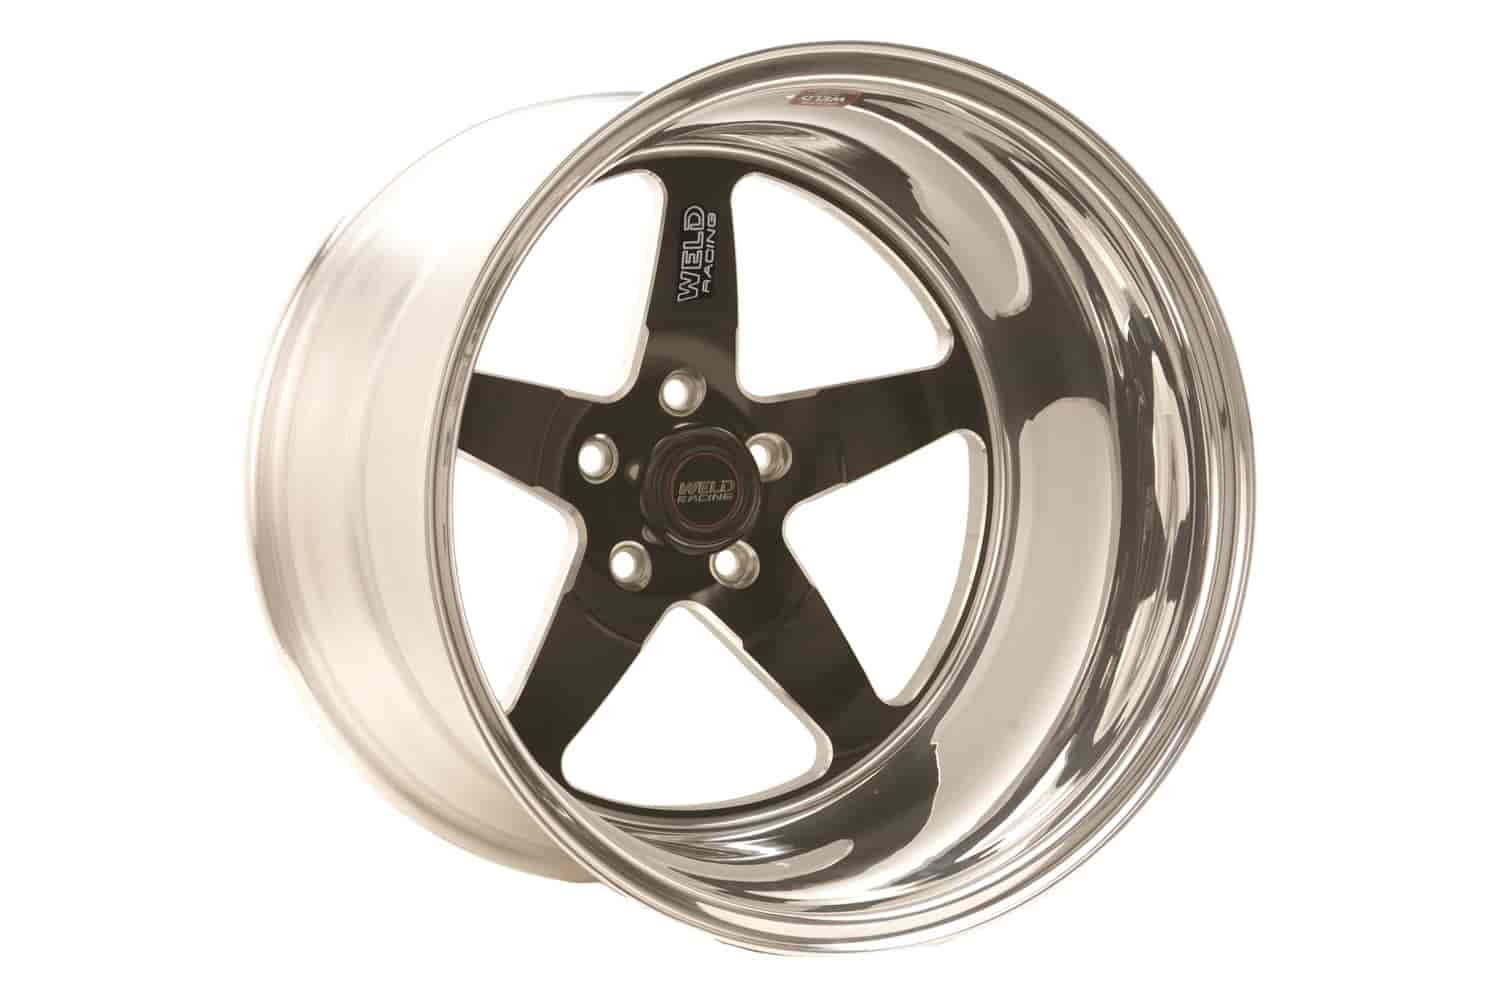 RT-S Series S71 Wheel Size: 15" x 8" Bolt Circle: 5 x 4-3/4" Back Space: 3-1/2"